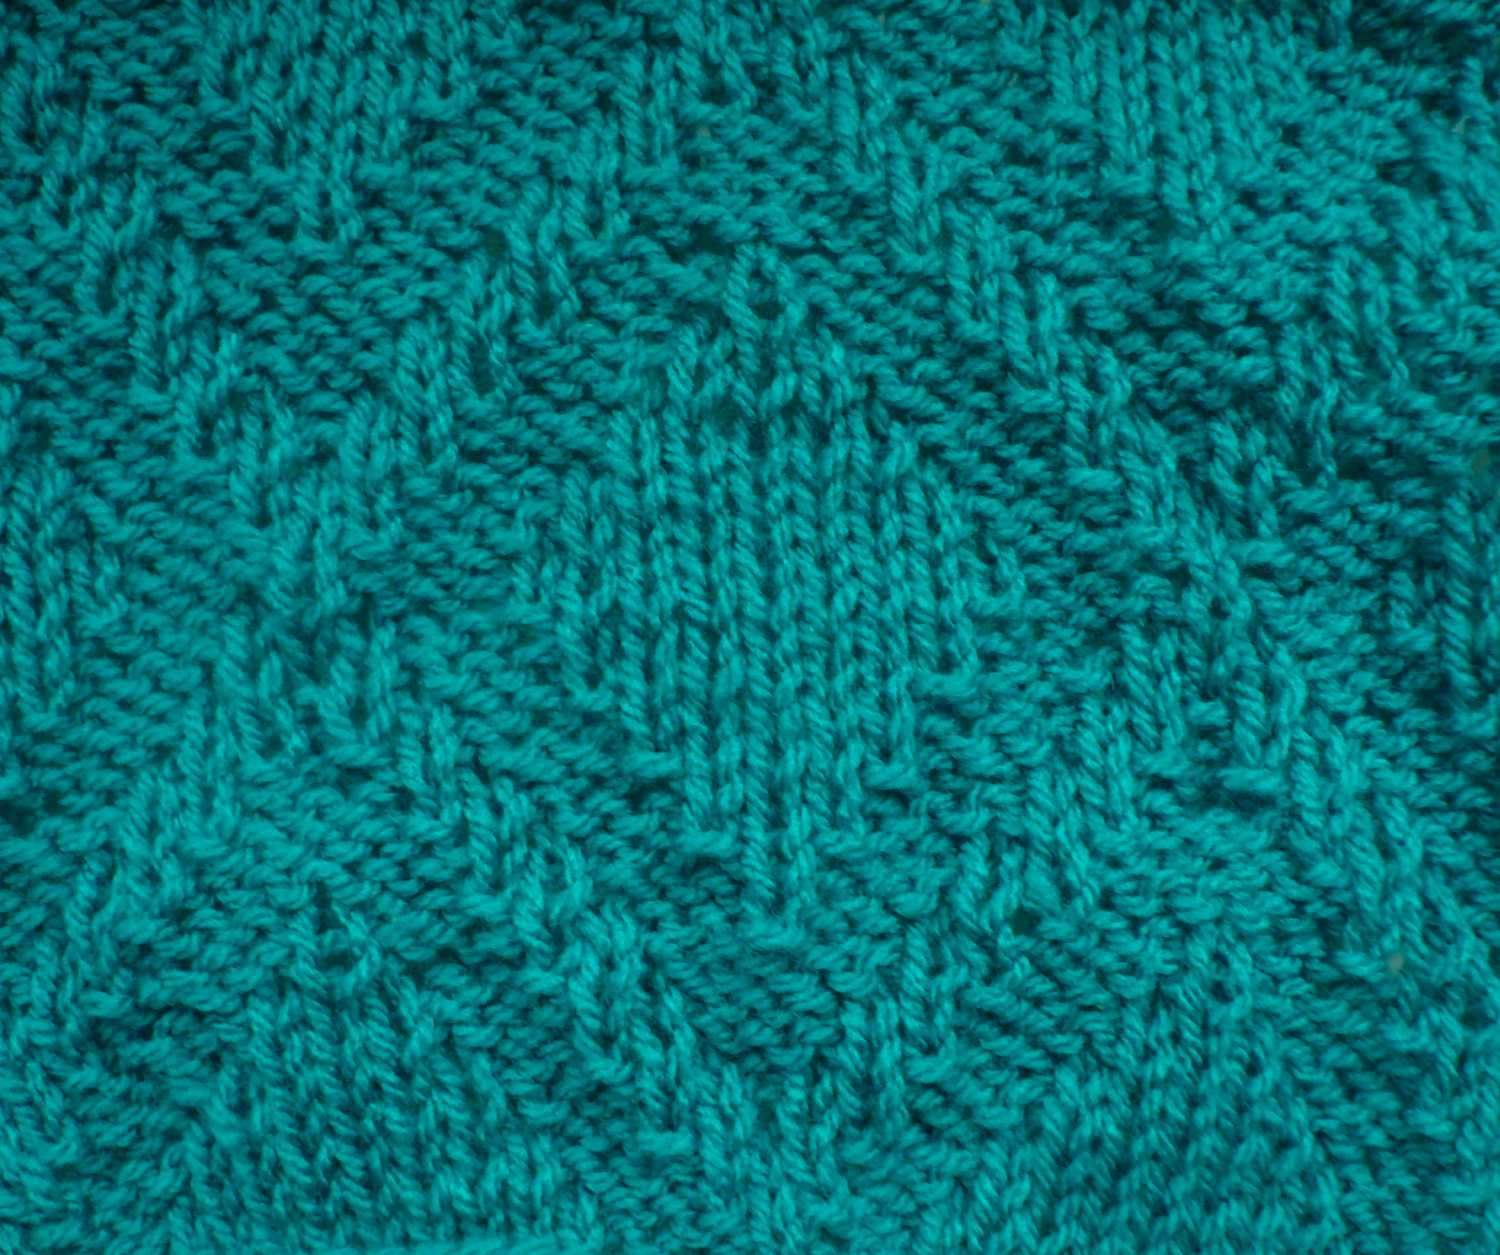 fabric cloth, download photo, background, texture, blue knitted background texture